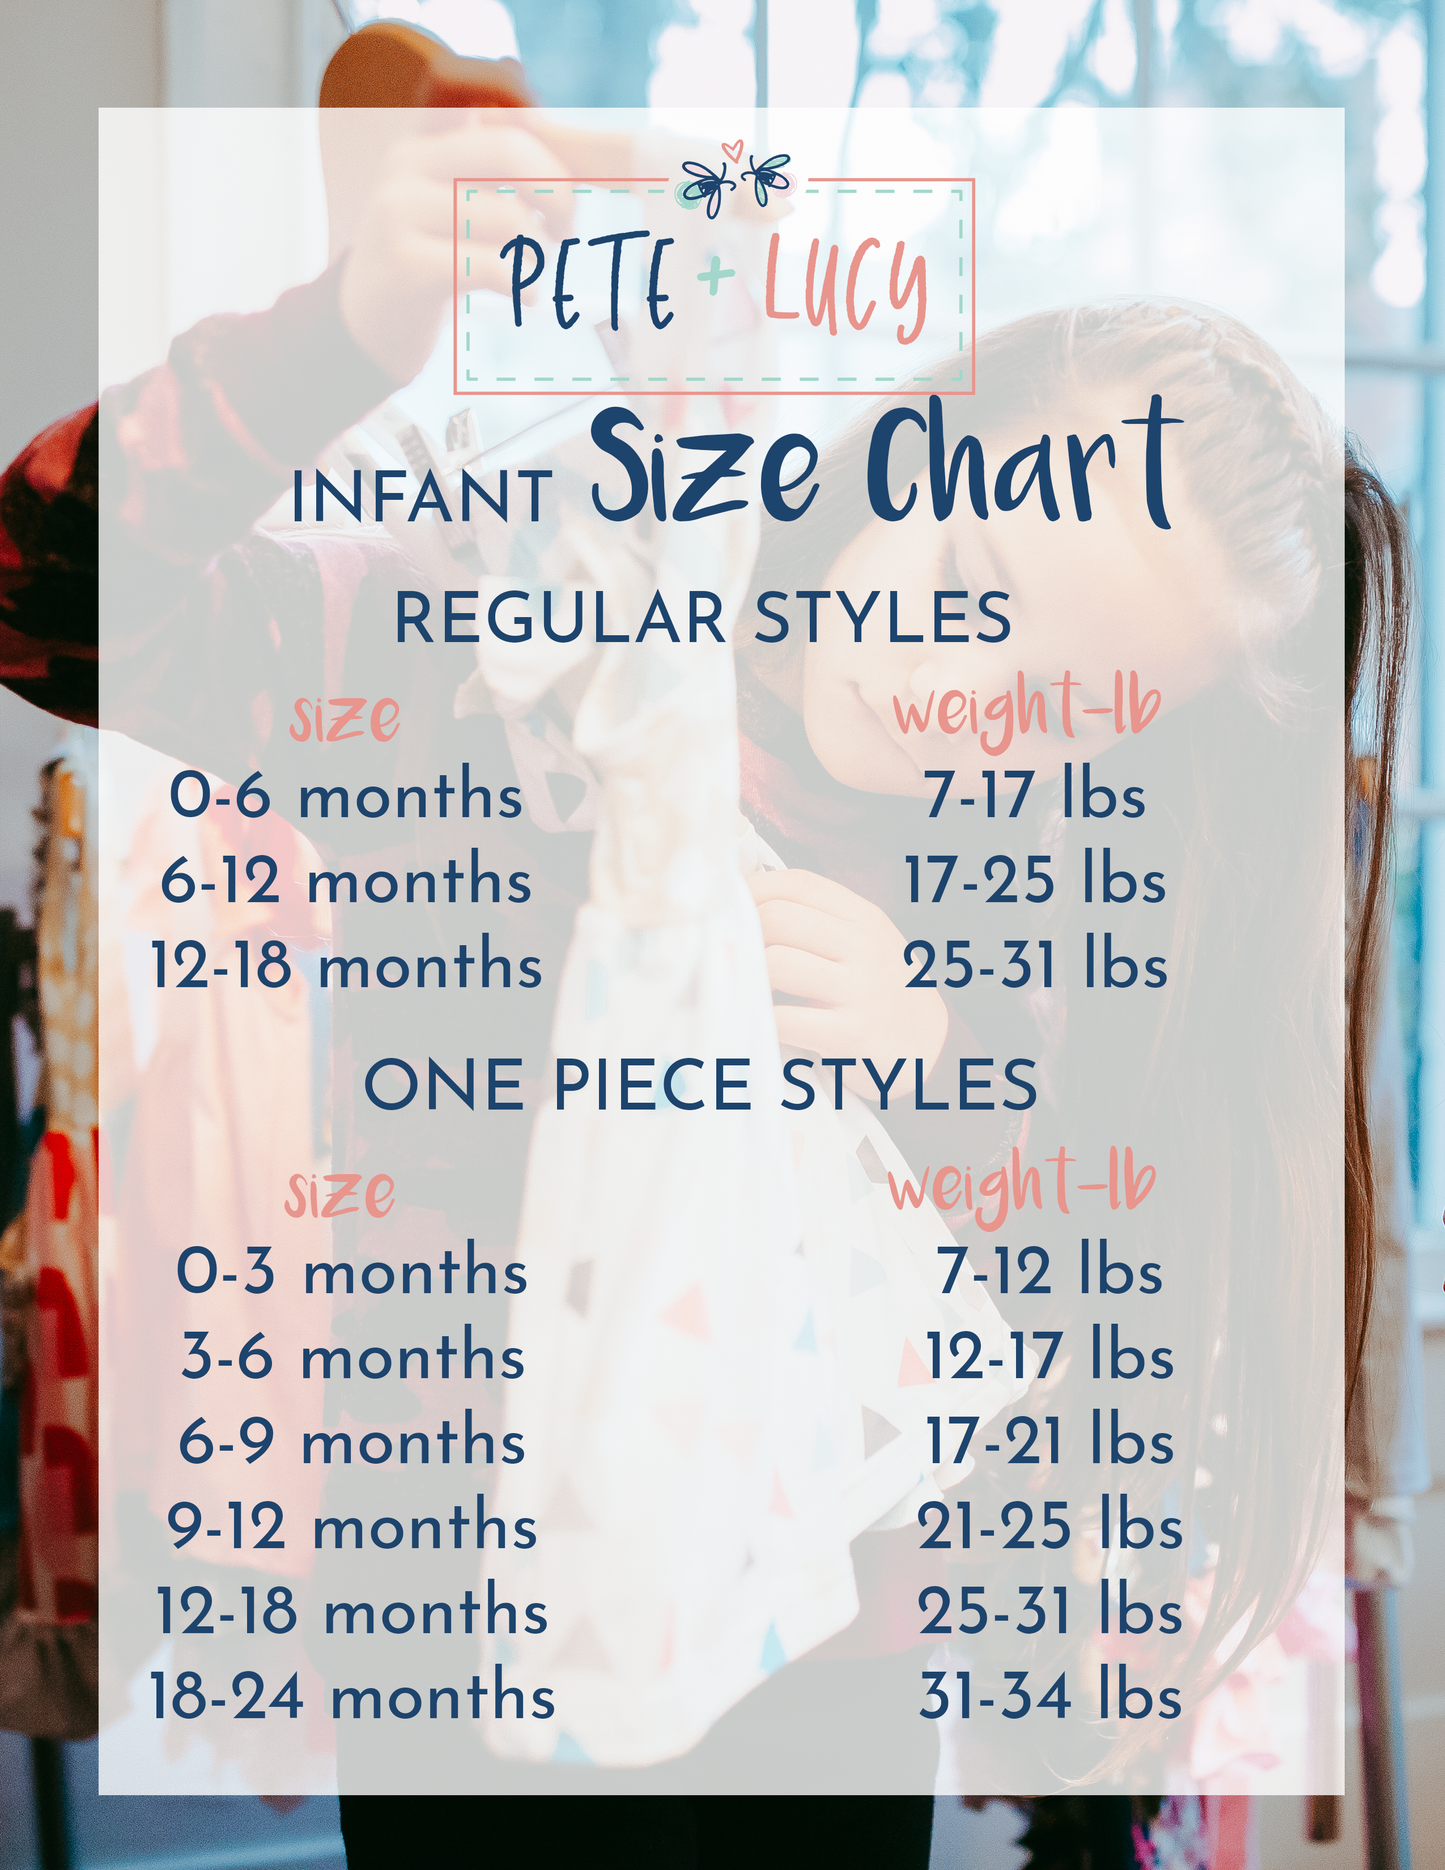 (Preorder) School Days Pant Set by Pete + Lucy